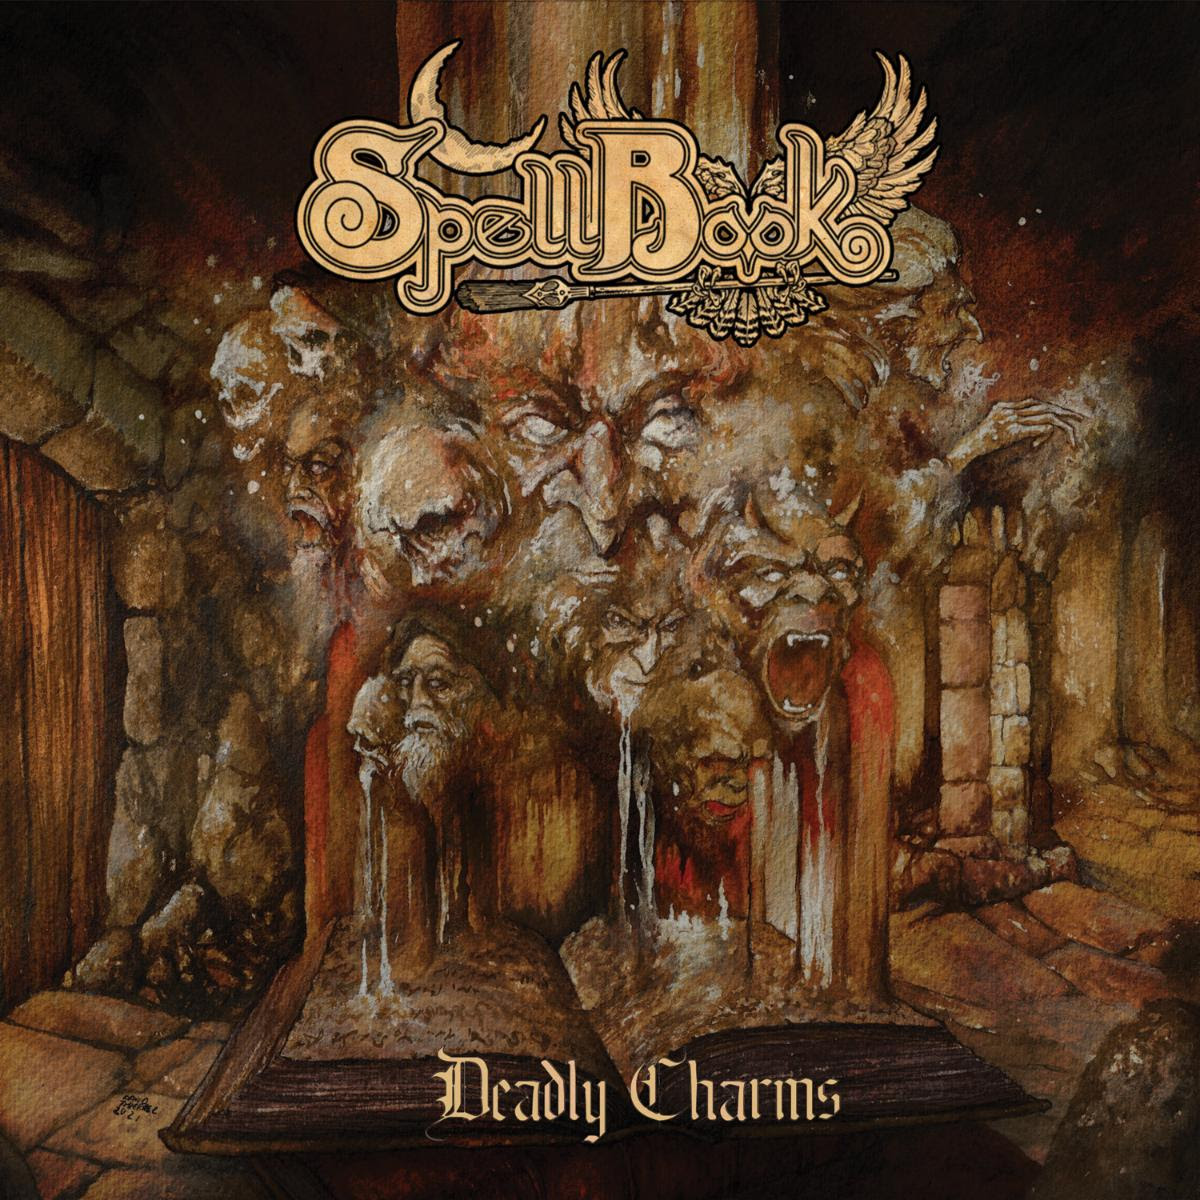 Album cover of "spellbook - deadly charms" featuring a dark, artistic illustration of eerie faces with streams of blood, set against an ancient spellbook backdrop.